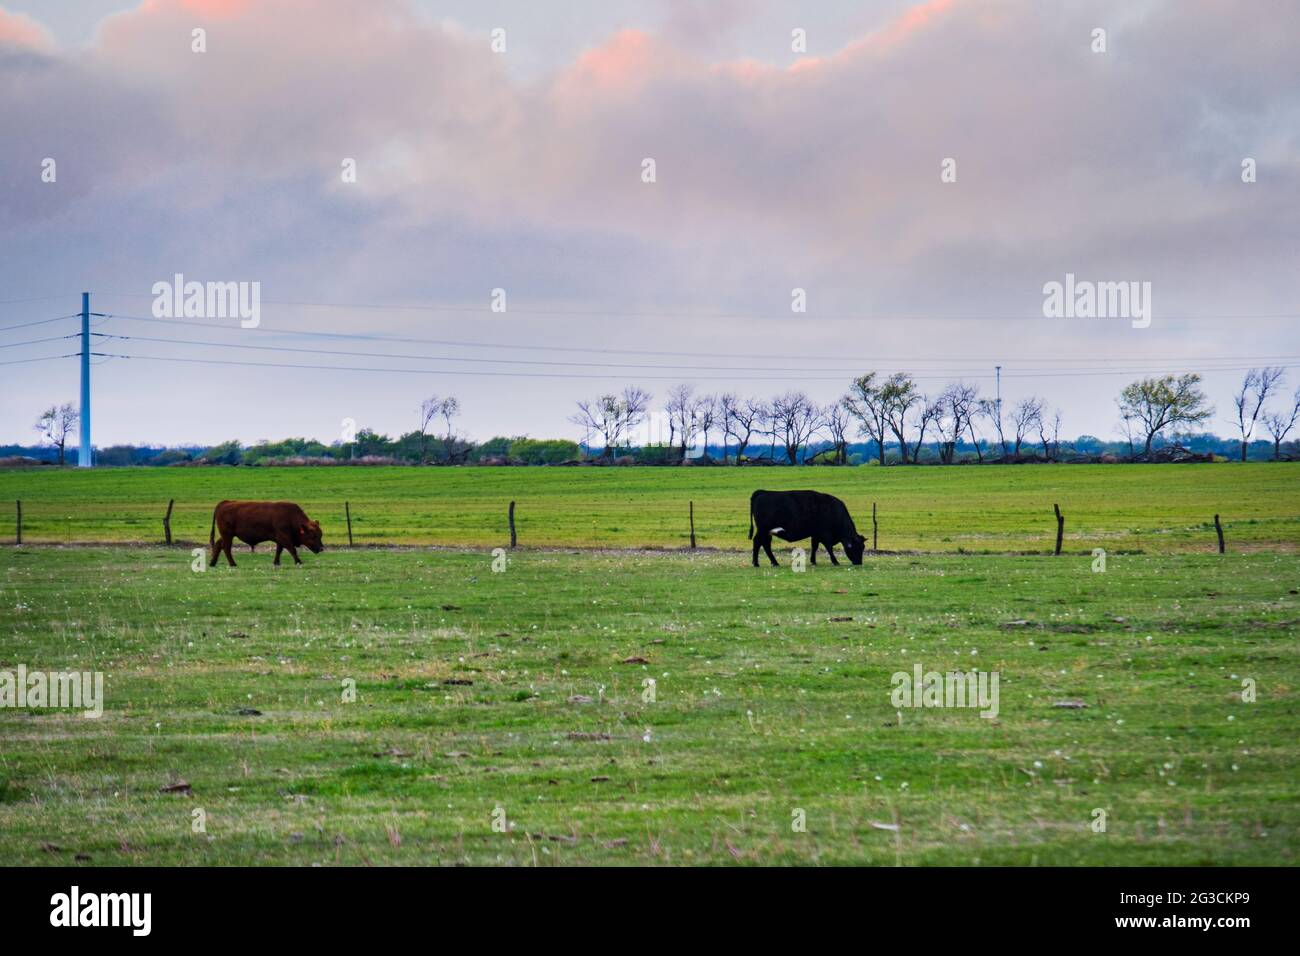 Two beef cattle graze on a grassyj pasture surrounded by a barbed wire fence in Kansas, USA in the spring. Stock Photo